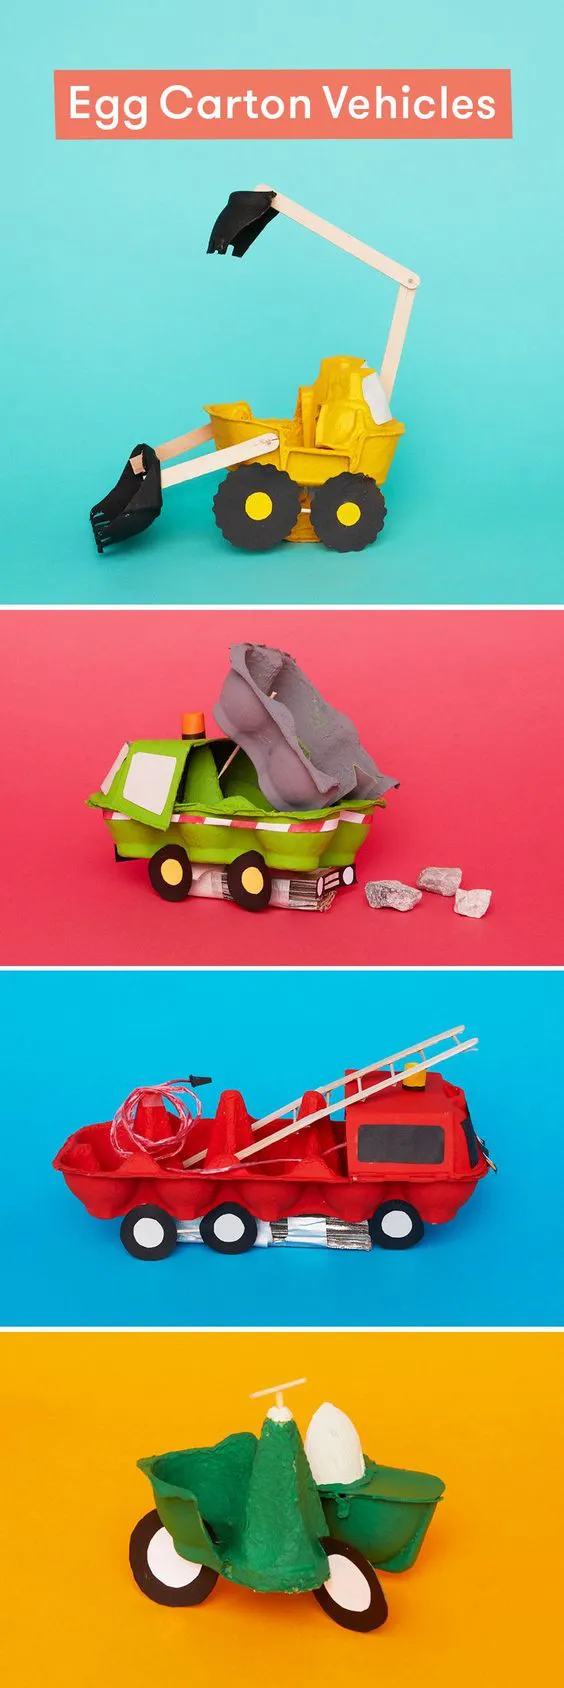 Turn egg cartons into vehicles with this ingenious cardboard craft for kids.: 